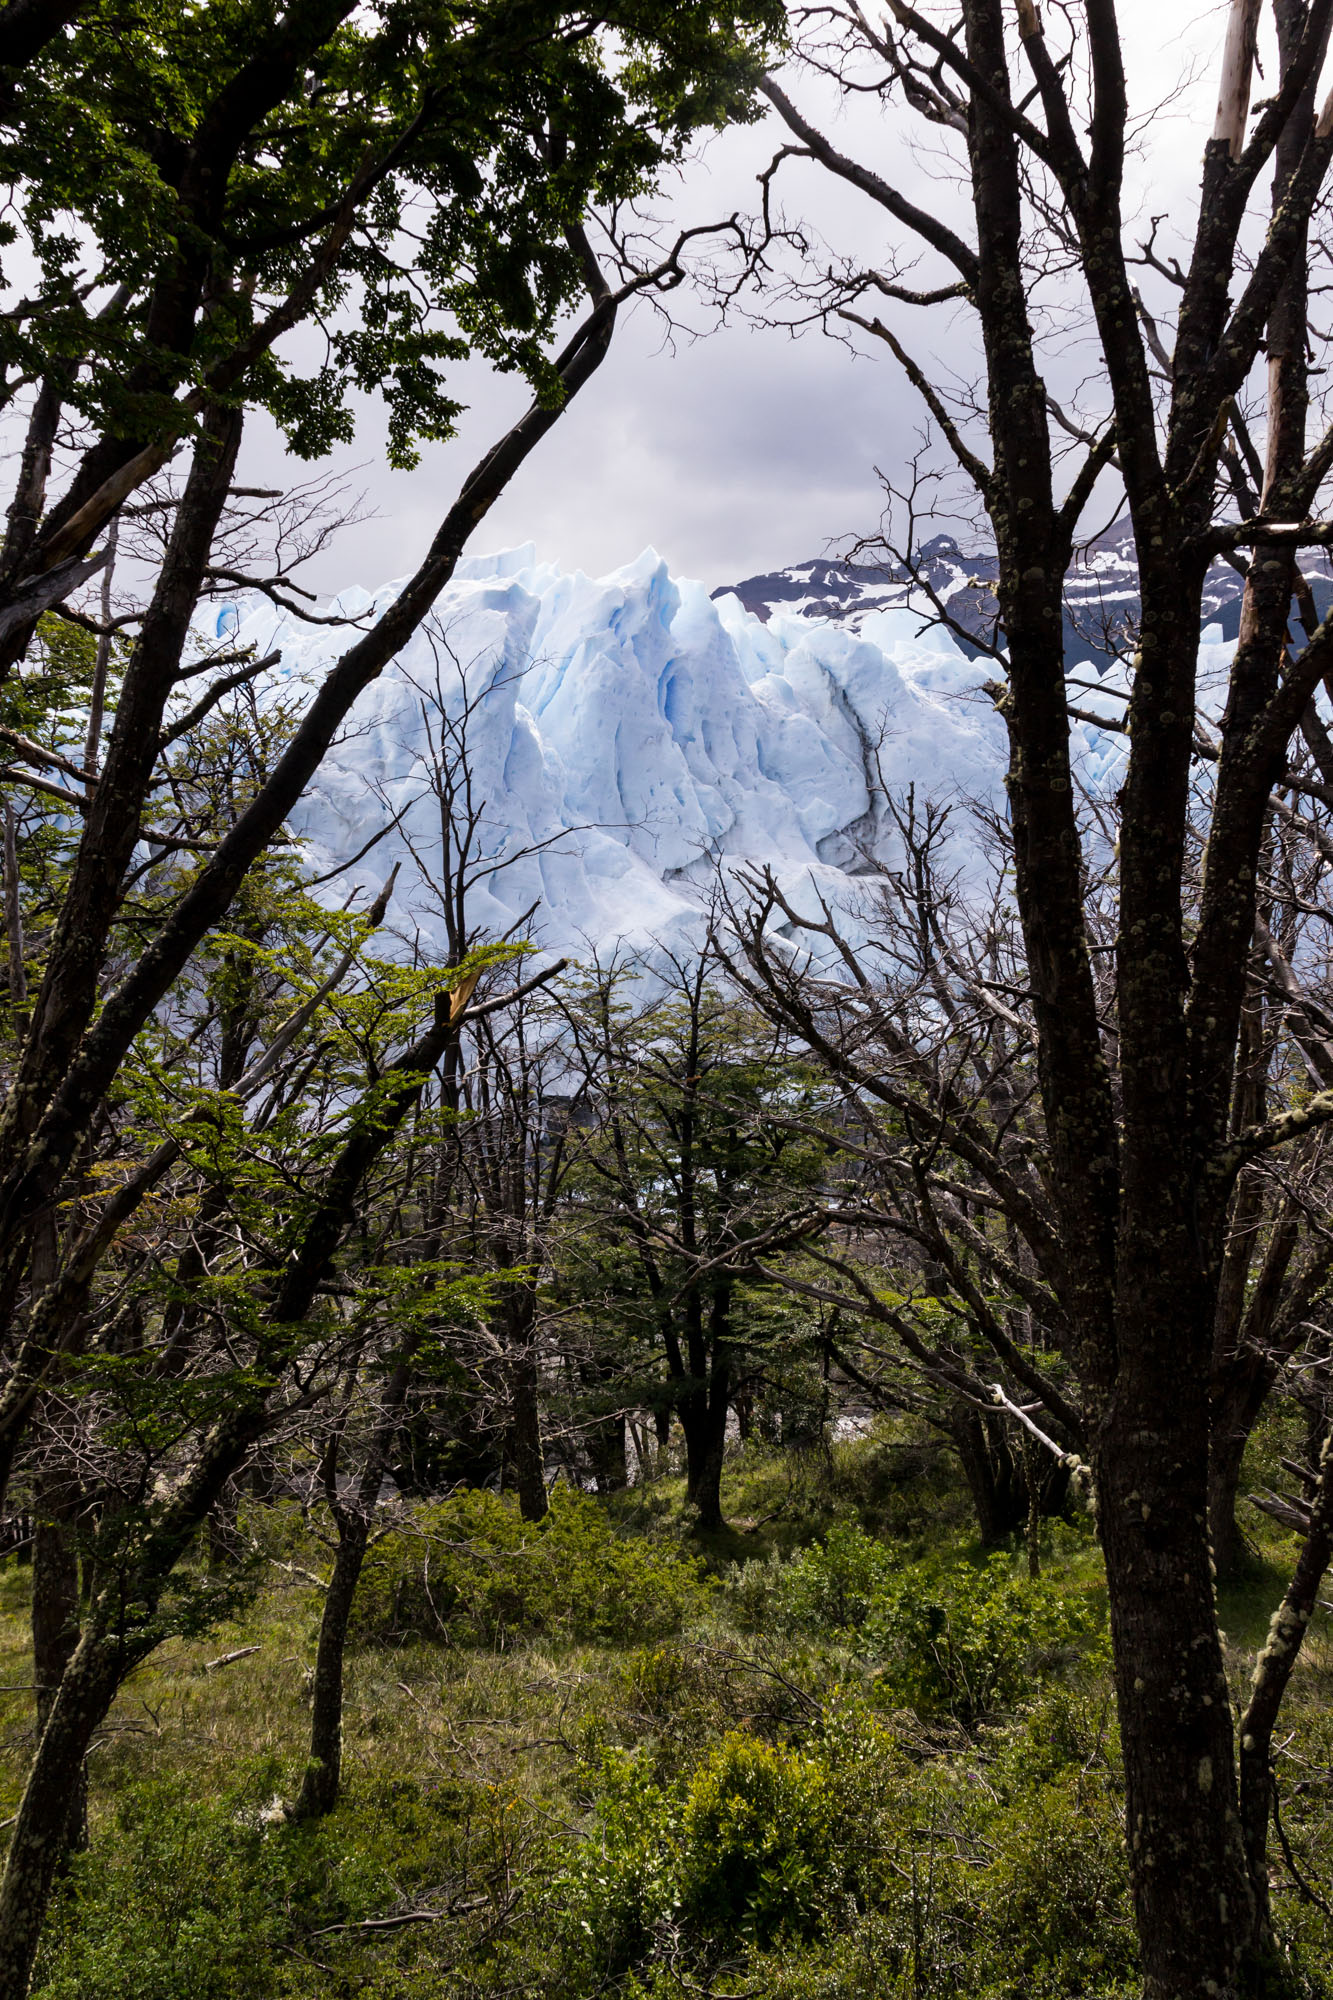 Immense amounts of precipitation on the Southern Patagonian Icefield feeds the glaciers and pushes them down to low elevations, creating the bizarre juxtaposition of woodland and ice